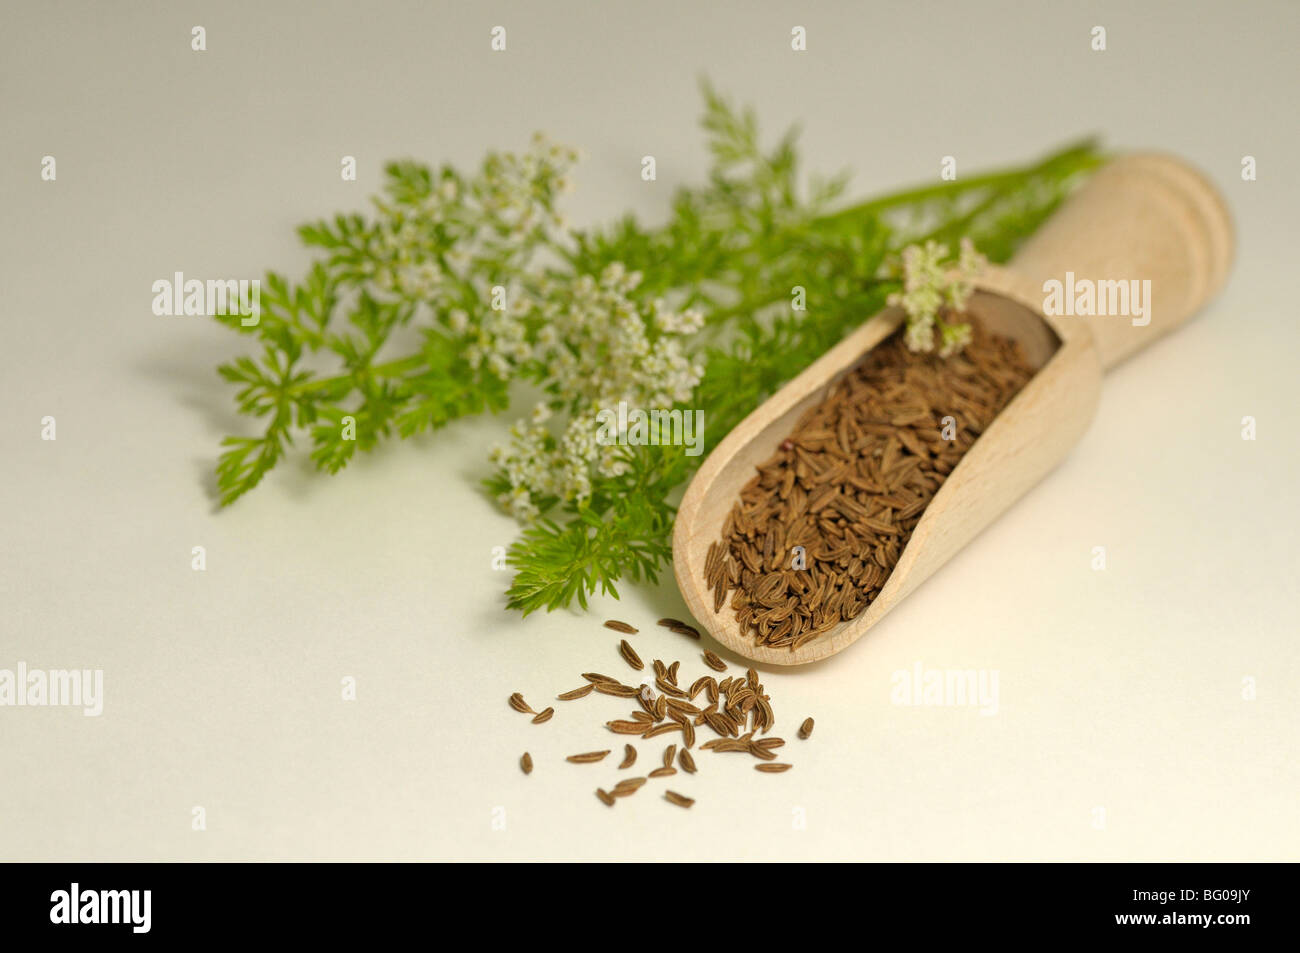 Caraway (Carum carvi). Leaves, seeds and flowers, studio picture. Stock Photo